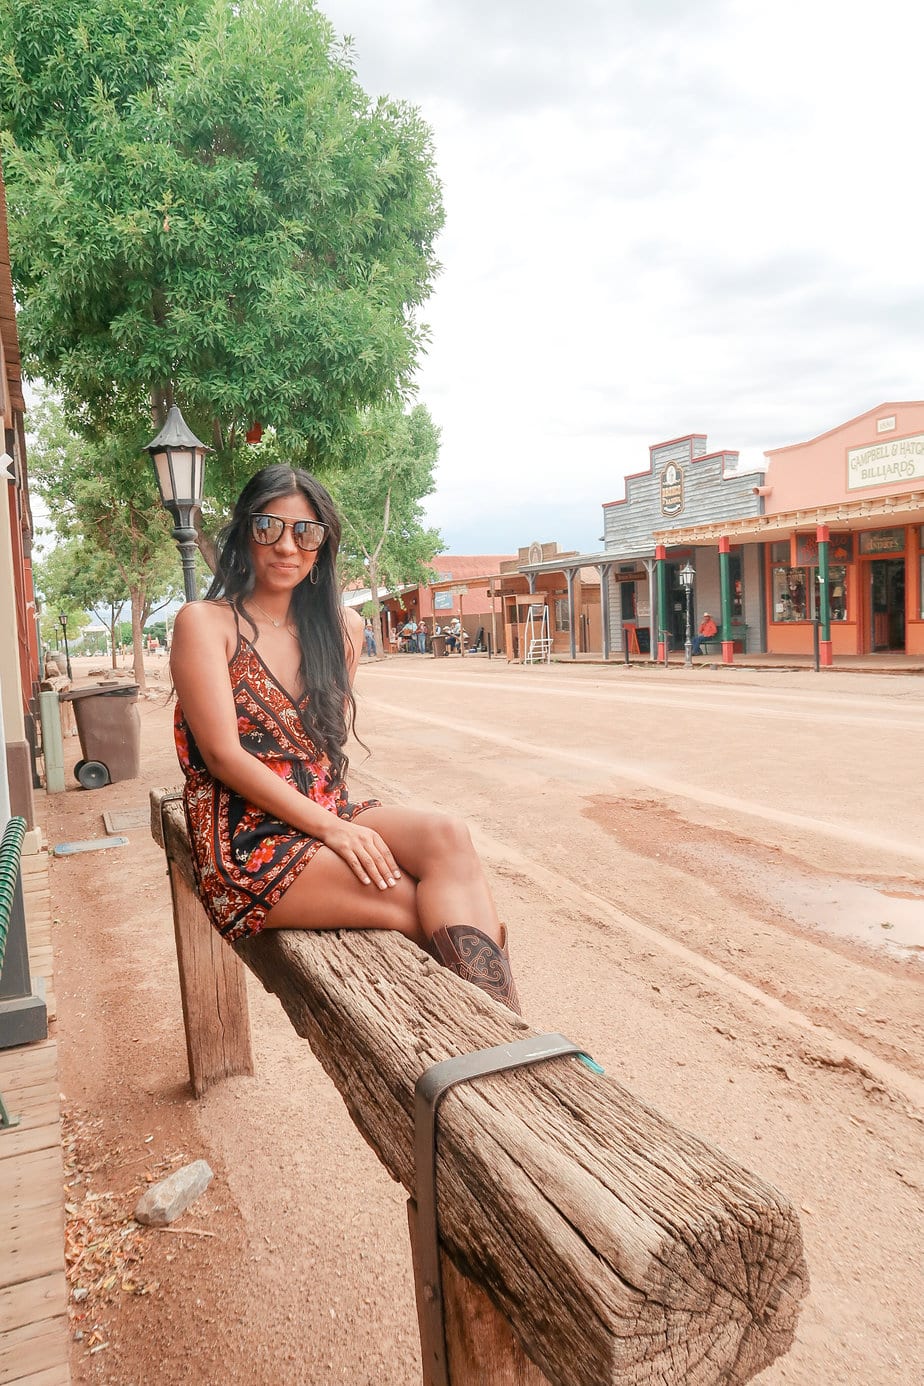 Tucson to Tombstone Roadtrip: 13 of the Best Stops Not To Miss!